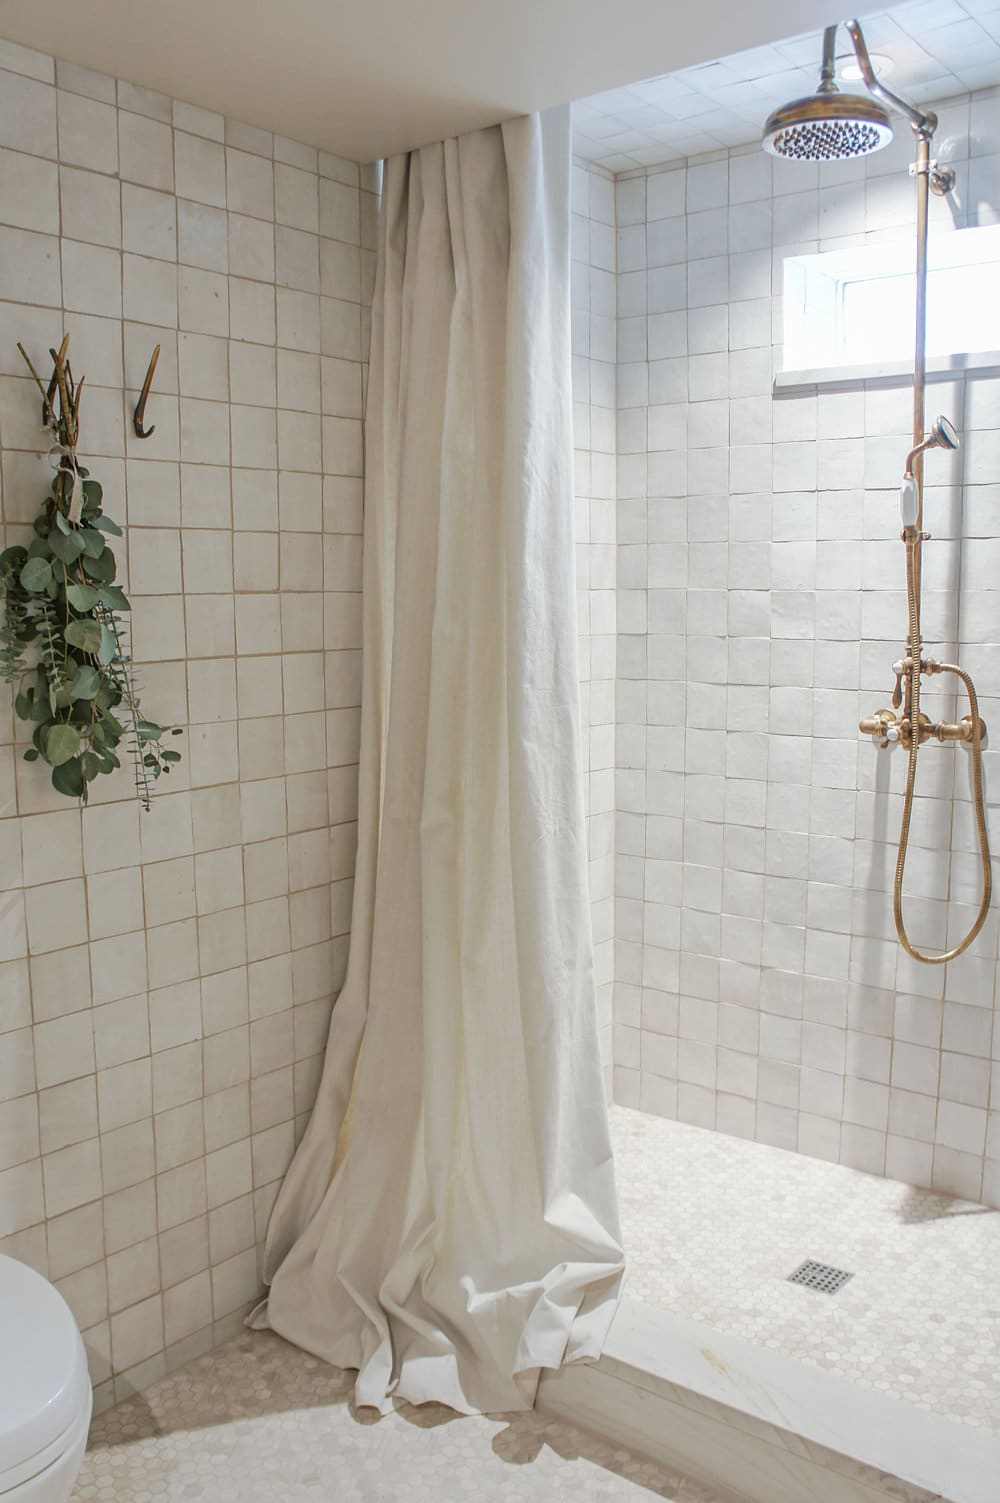 cream zellige tiles and brass hardware in the shower